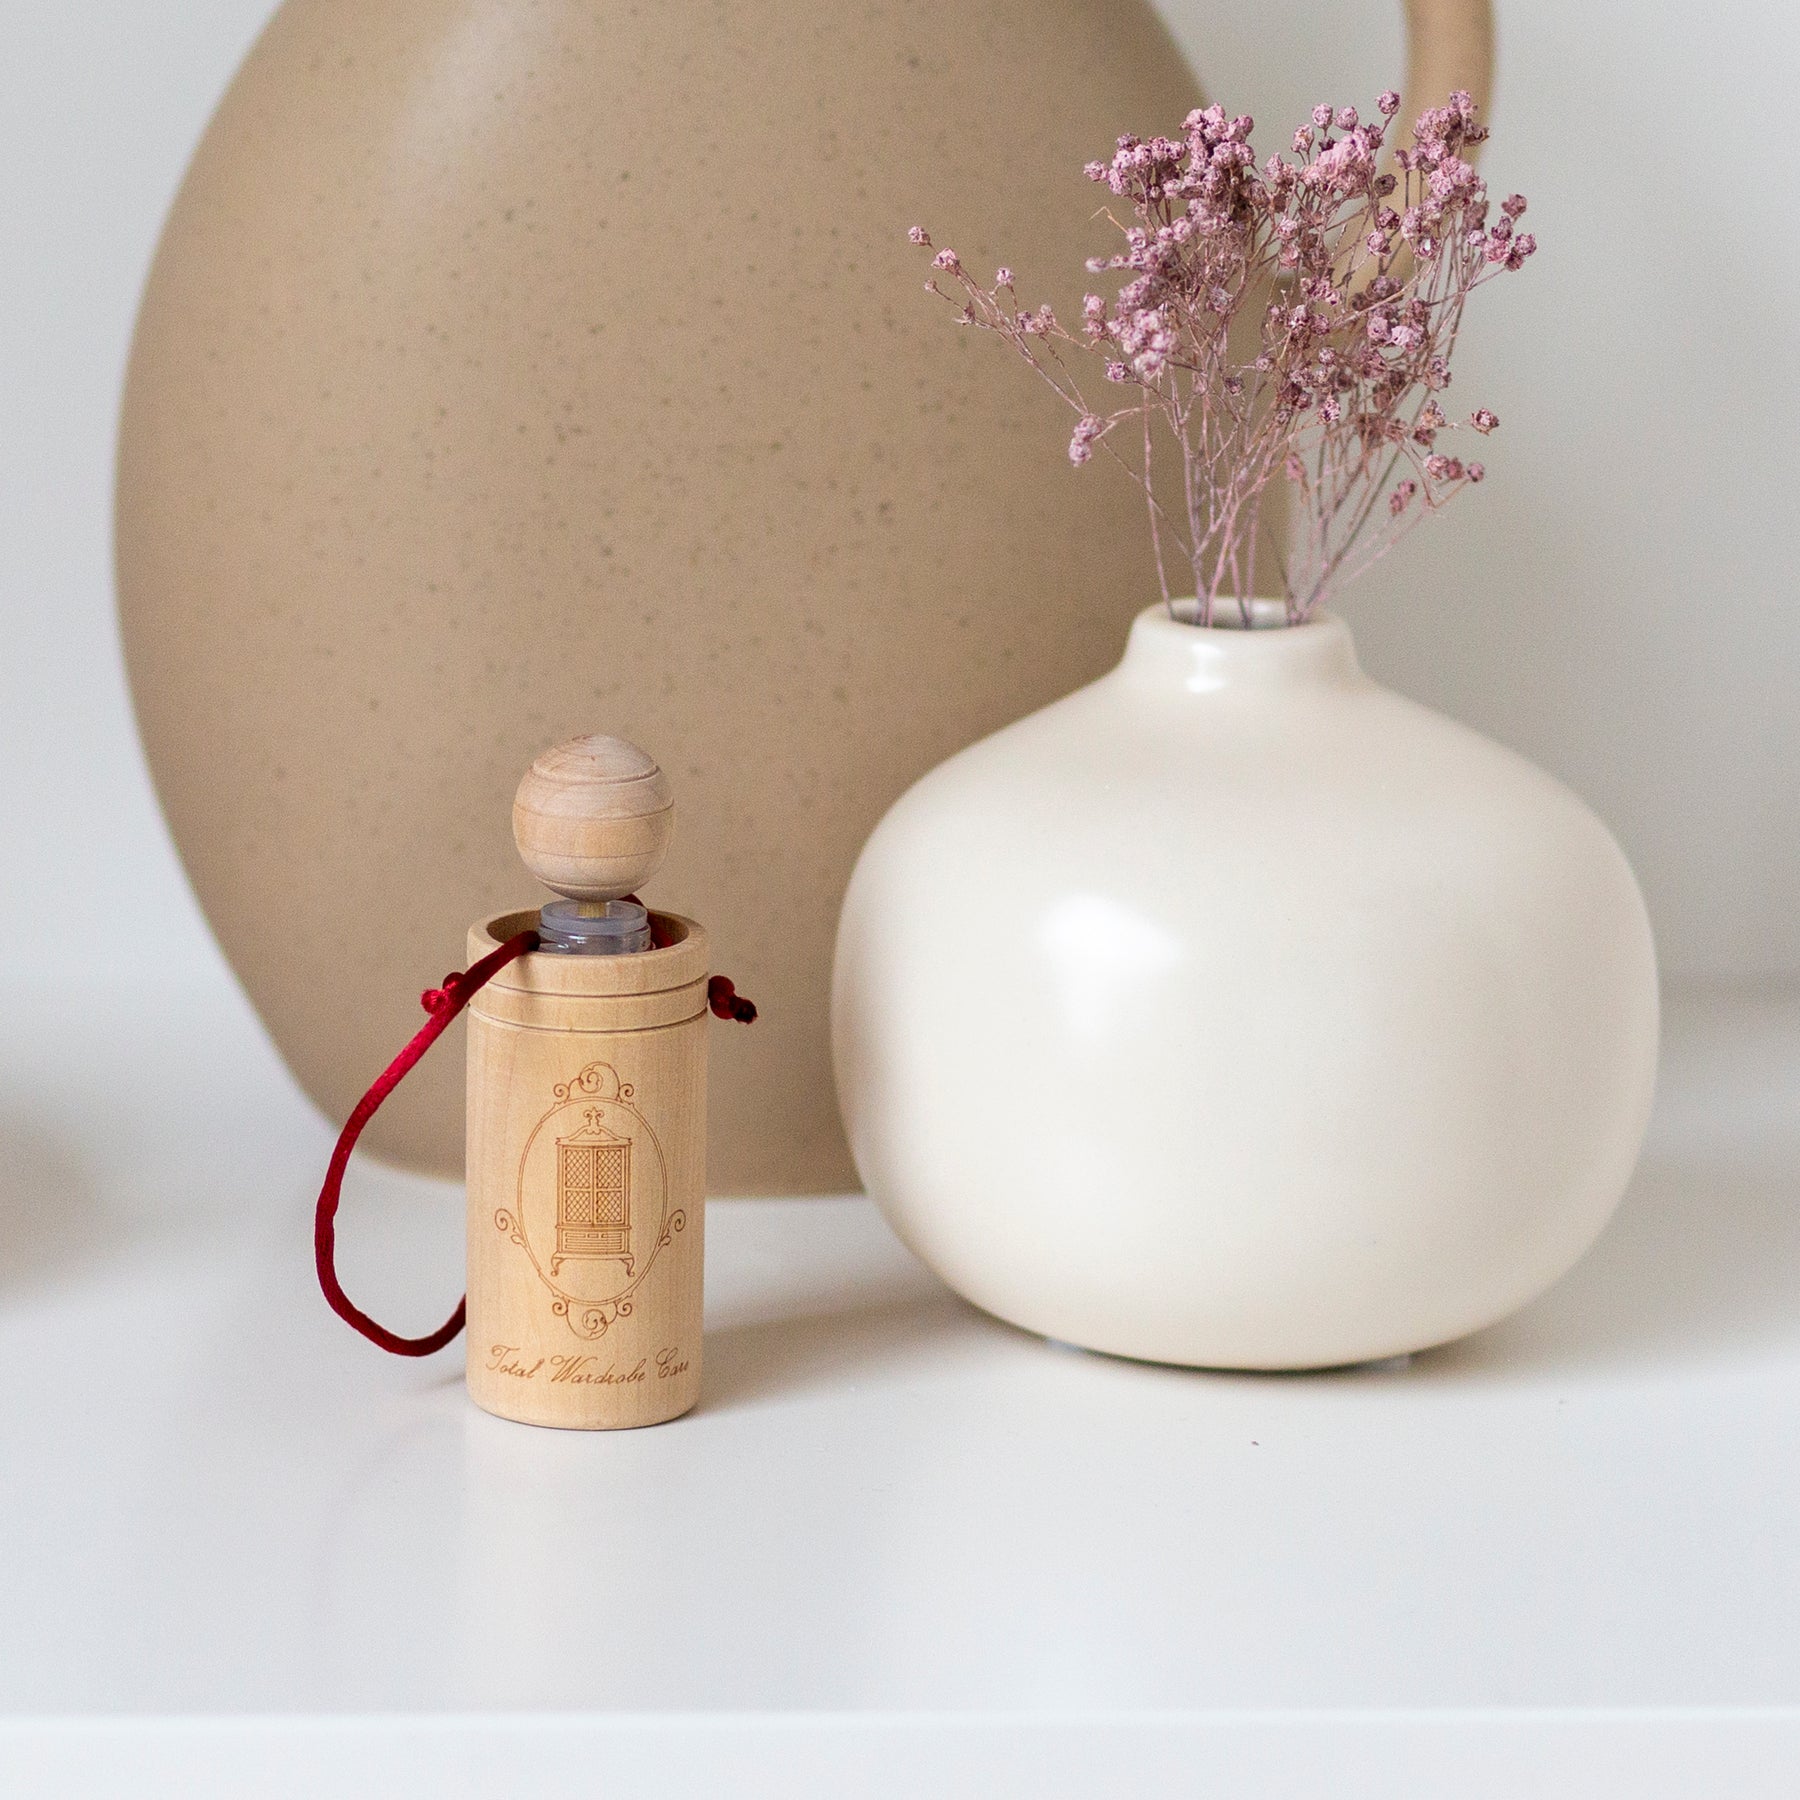 Wooden diffuser cup beside smooth white vase with small pink flowers inside